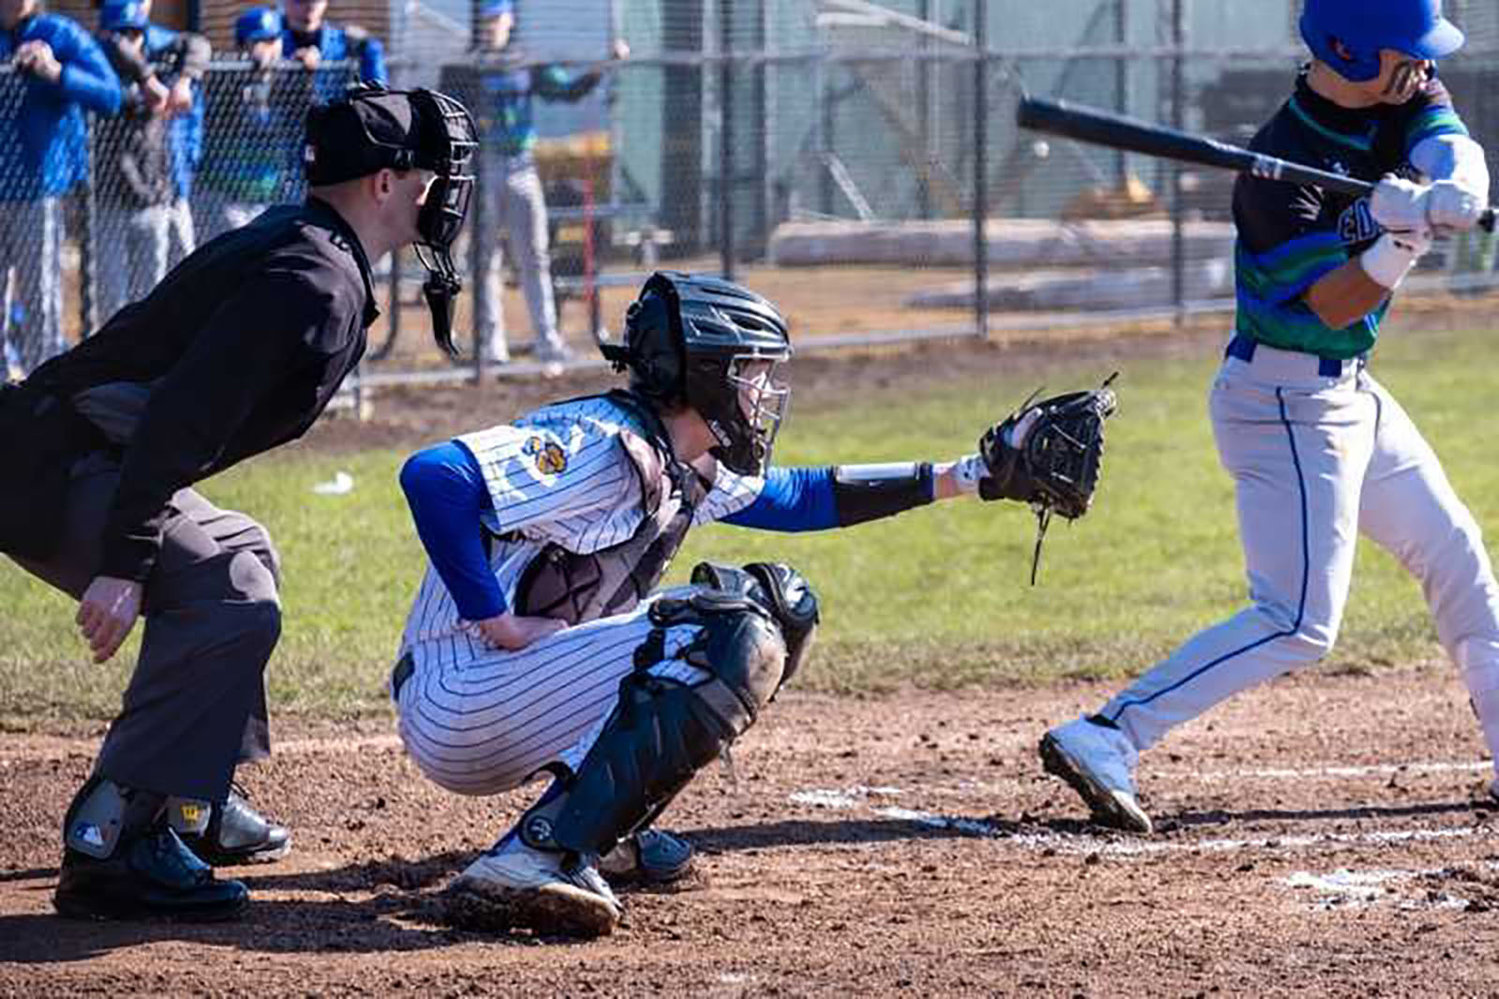 Centralia College catcher Casen Taggart waits on a pitch during an NWAC baseball game at Ed Wheeler Field during the 2022 season.